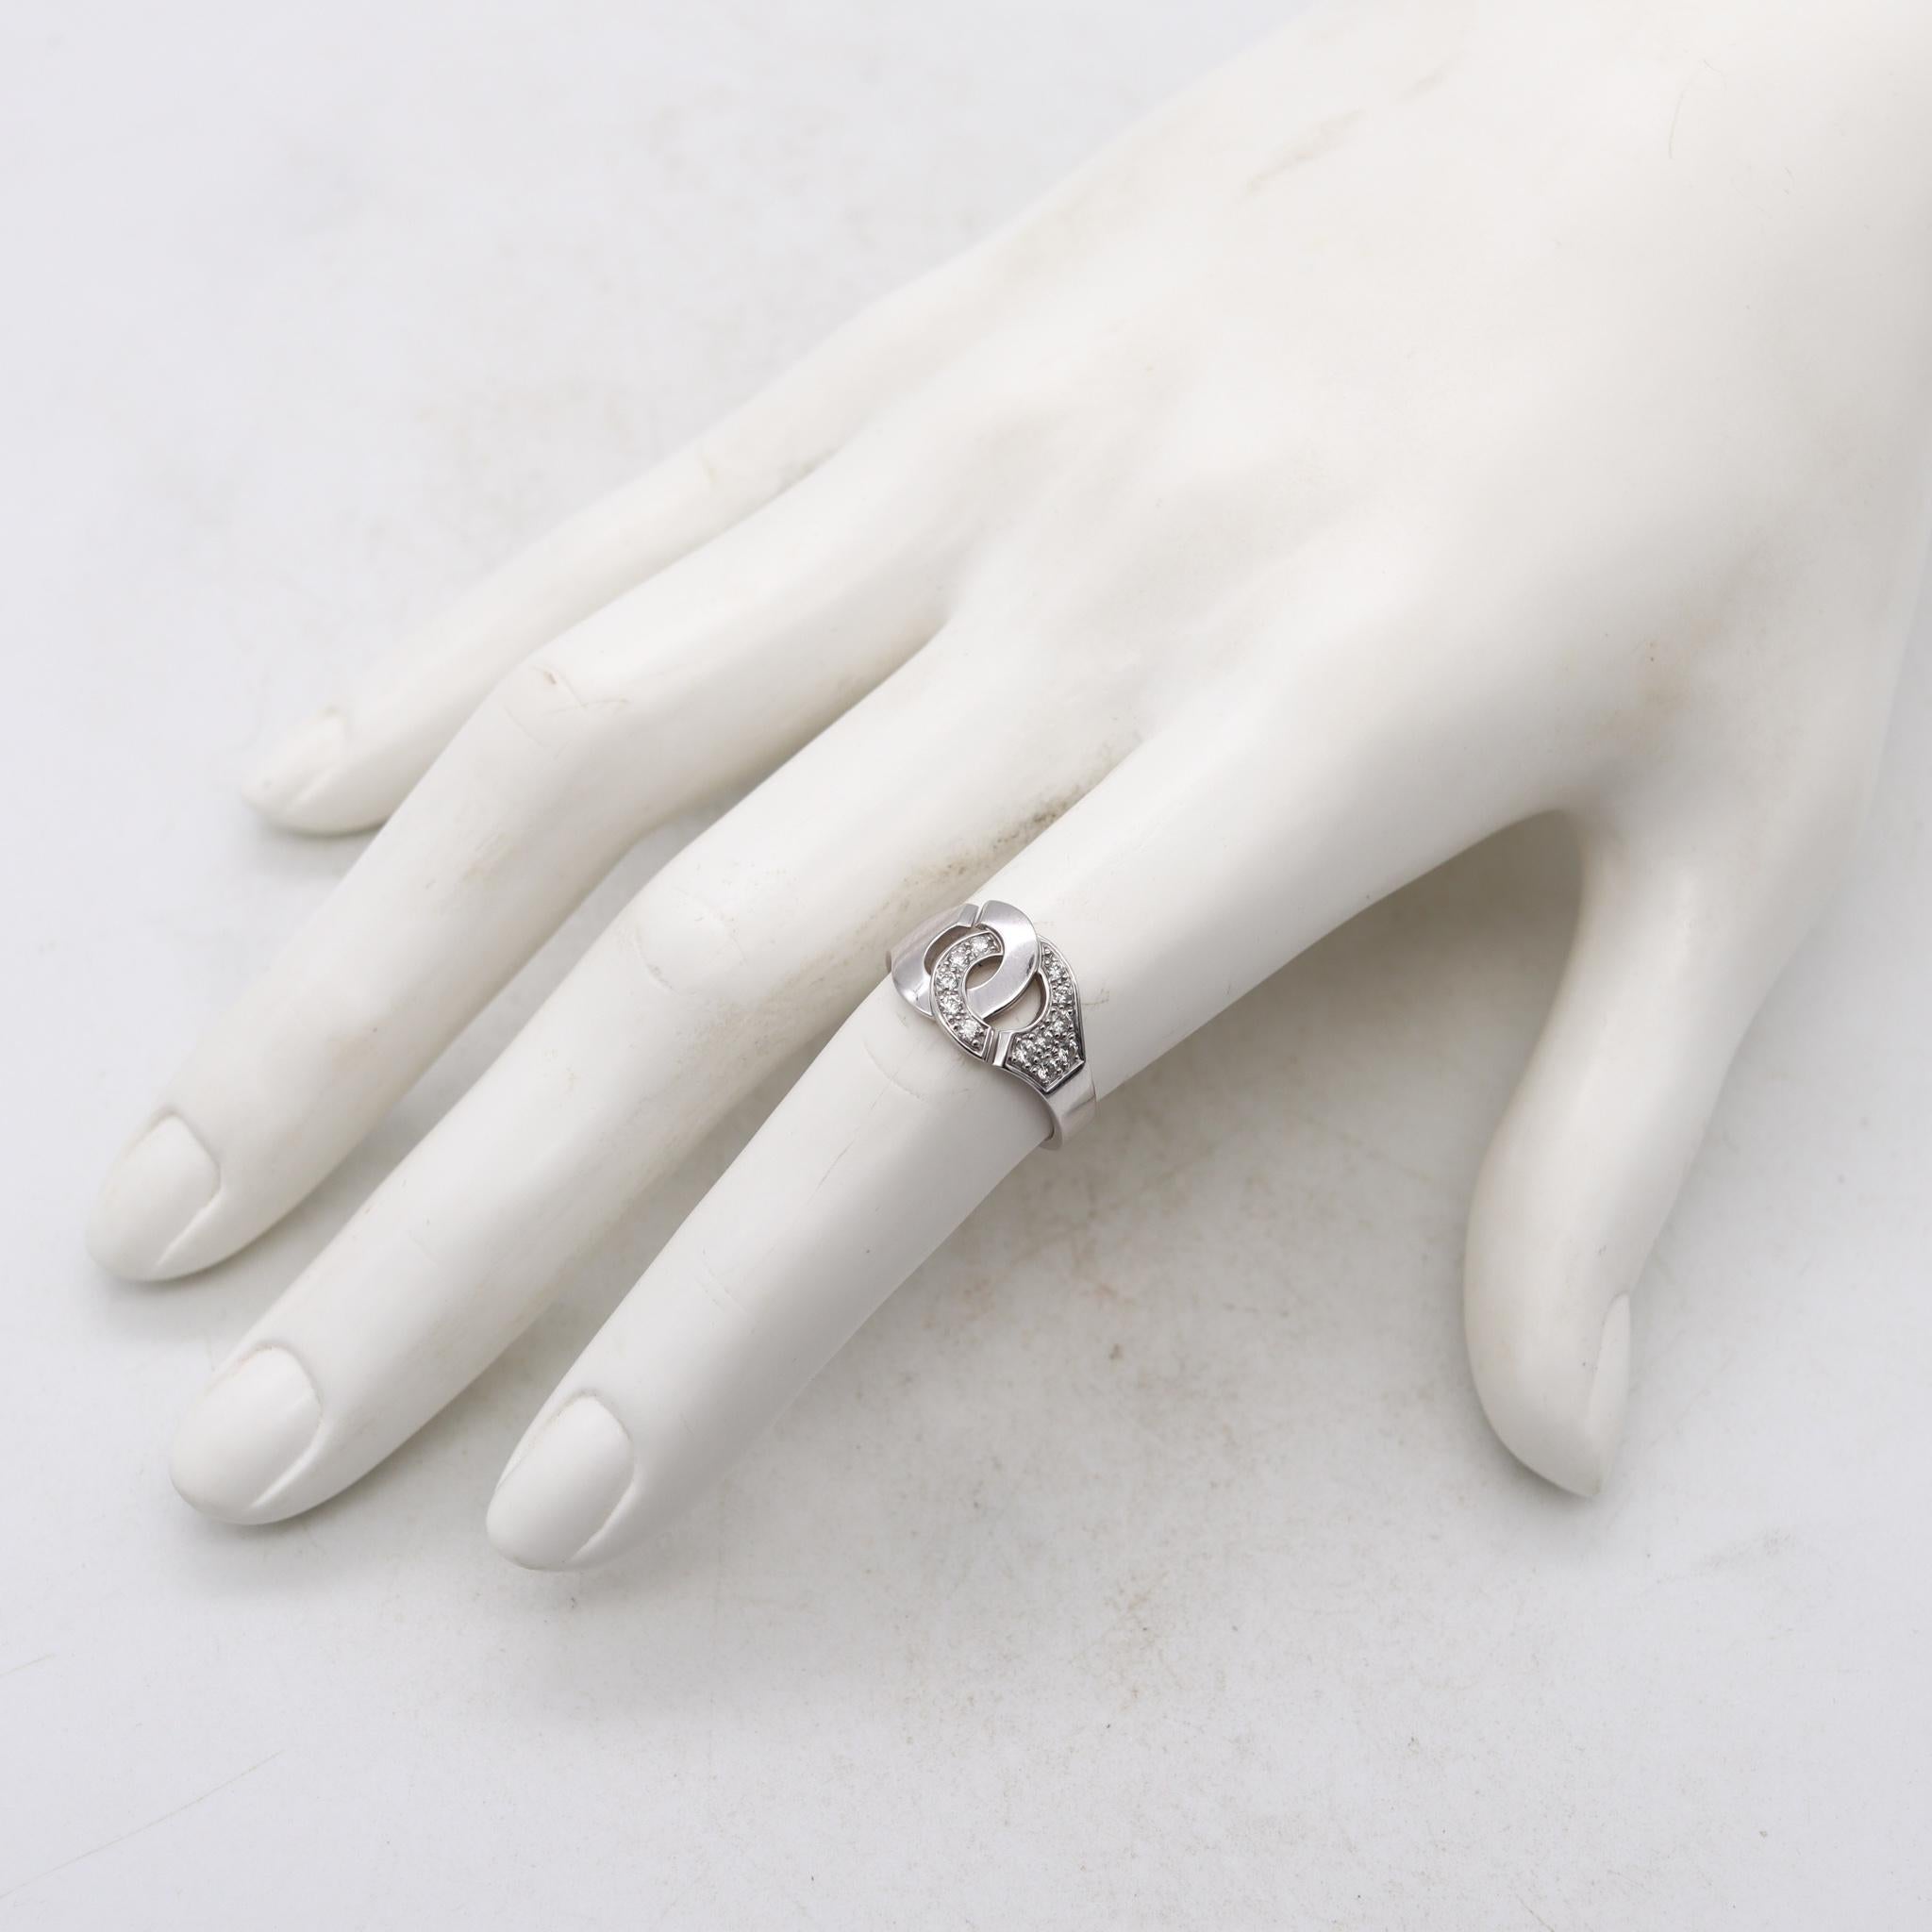 Menottes R10 ring designed by Dinh Van.

A vintage piece, crafted in Paris, France by the artist jeweler Jean Dinh Van. This iconic Menottes R10 ring has been crafted in solid white gold of 18 karats, with very high polished finish.

Composed by two